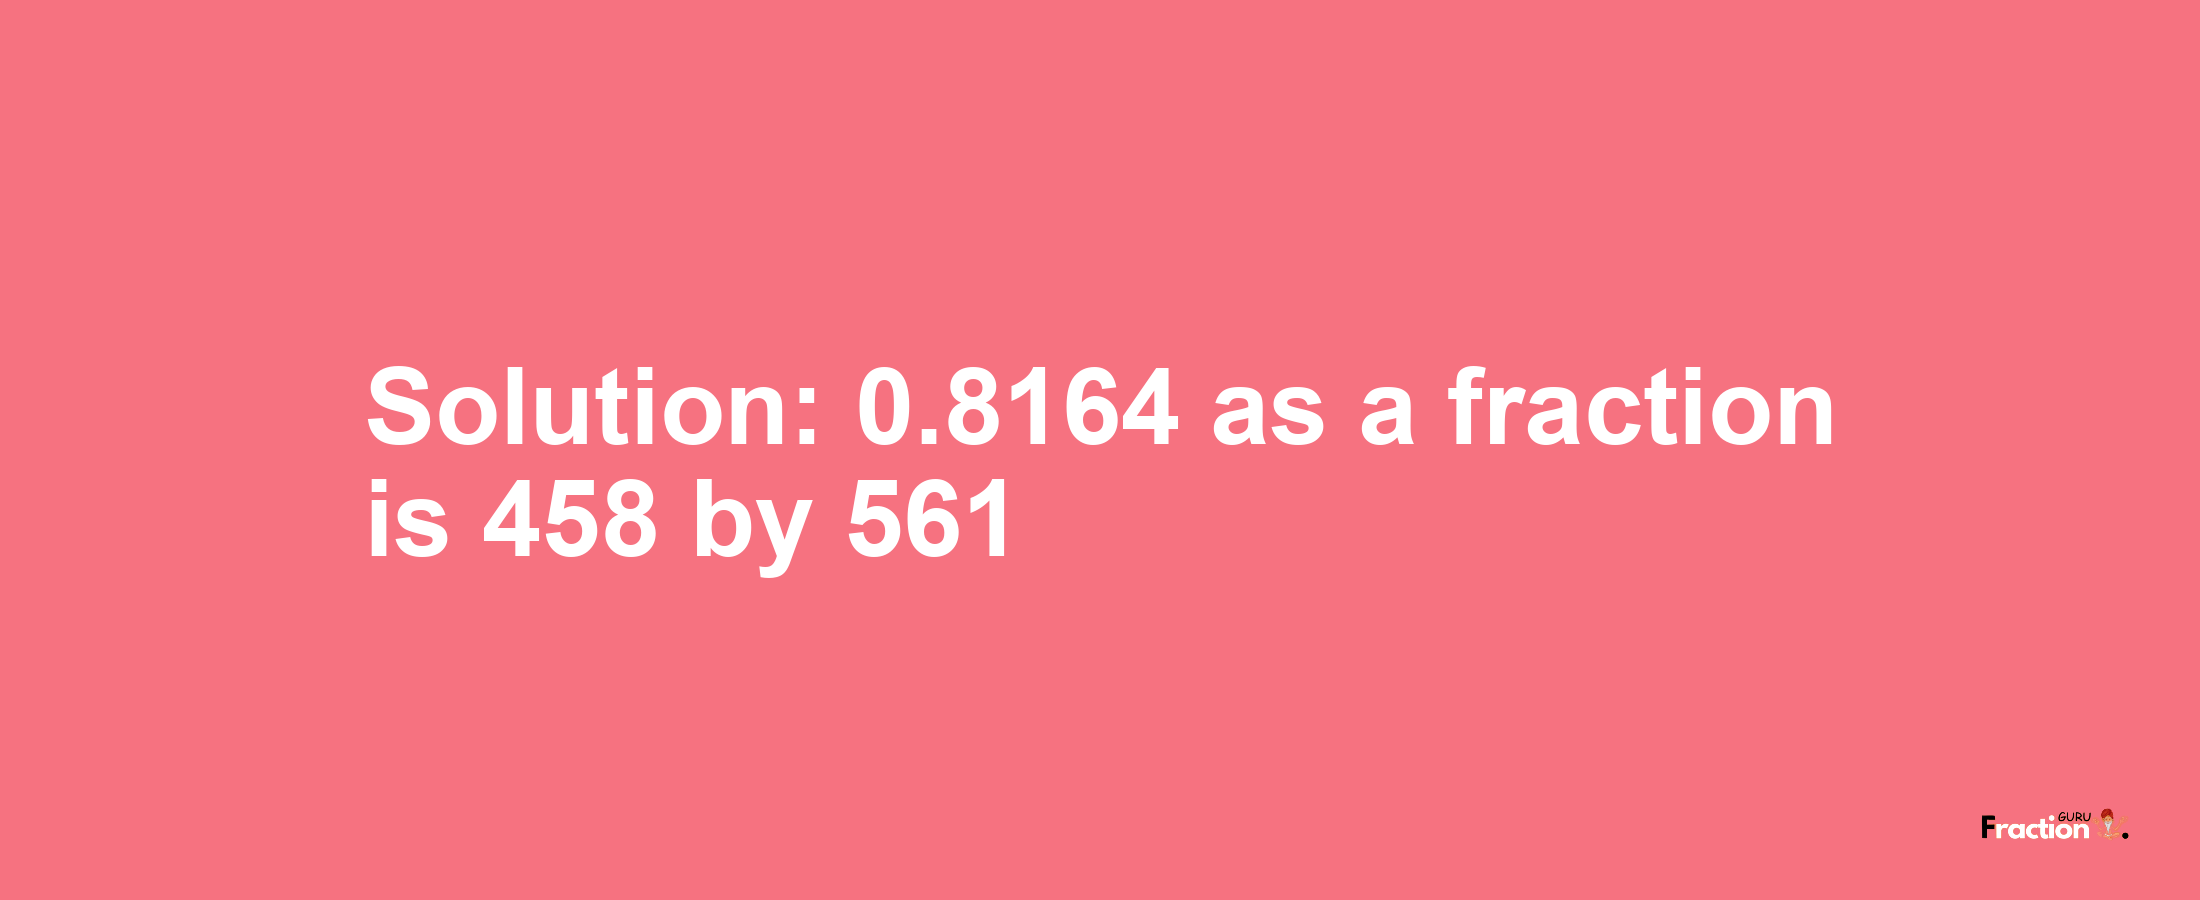 Solution:0.8164 as a fraction is 458/561